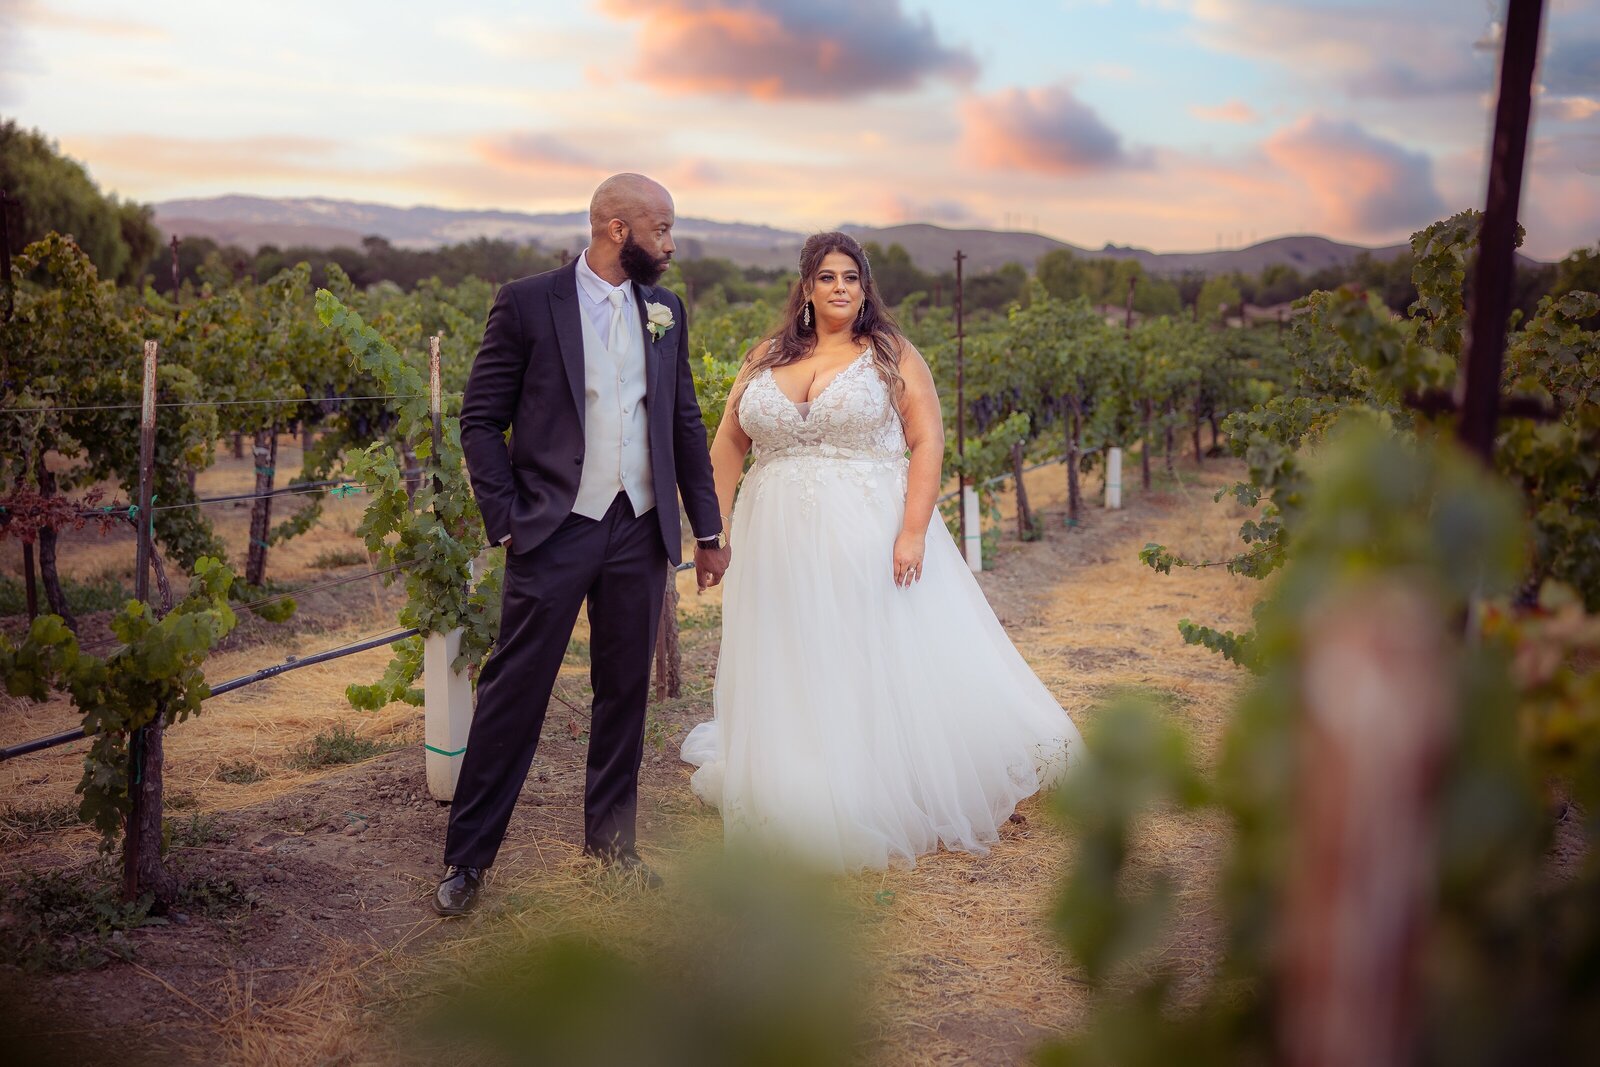 Sacramento wedding photographer from sacramento takes photo of married couple in vineyard peering off into the distance with vibrant sky in the background.